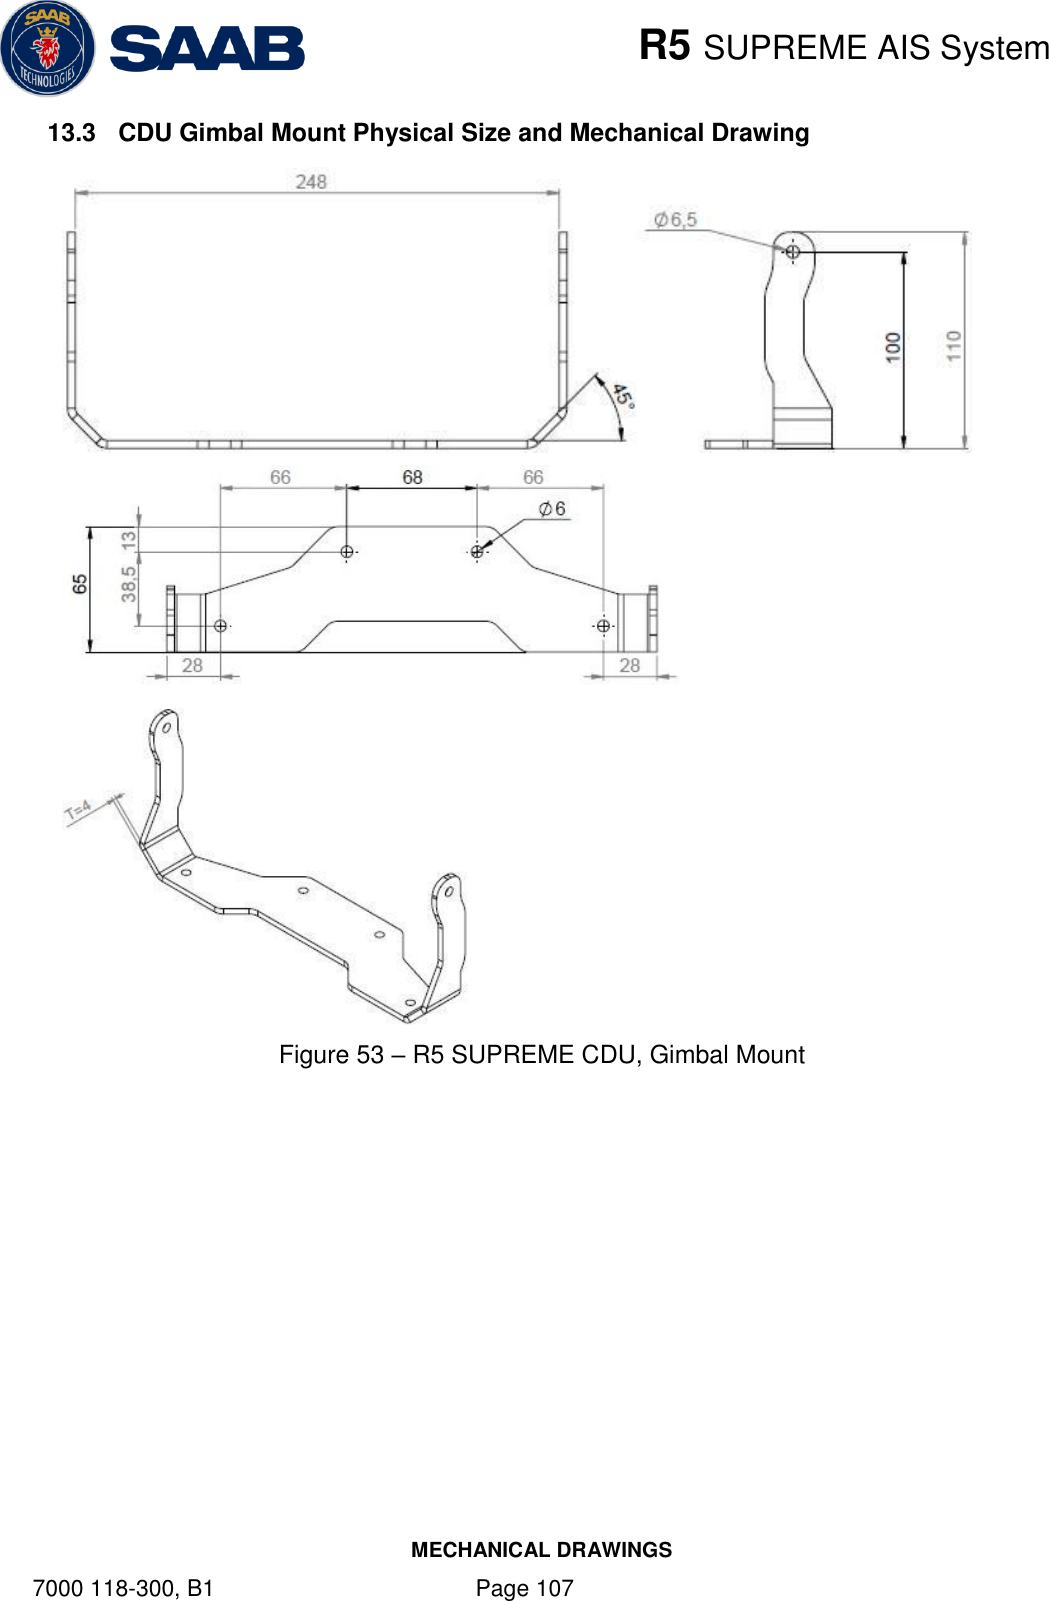    R5 SUPREME AIS System MECHANICAL DRAWINGS 7000 118-300, B1    Page 107 13.3  CDU Gimbal Mount Physical Size and Mechanical Drawing    Figure 53 – R5 SUPREME CDU, Gimbal Mount     